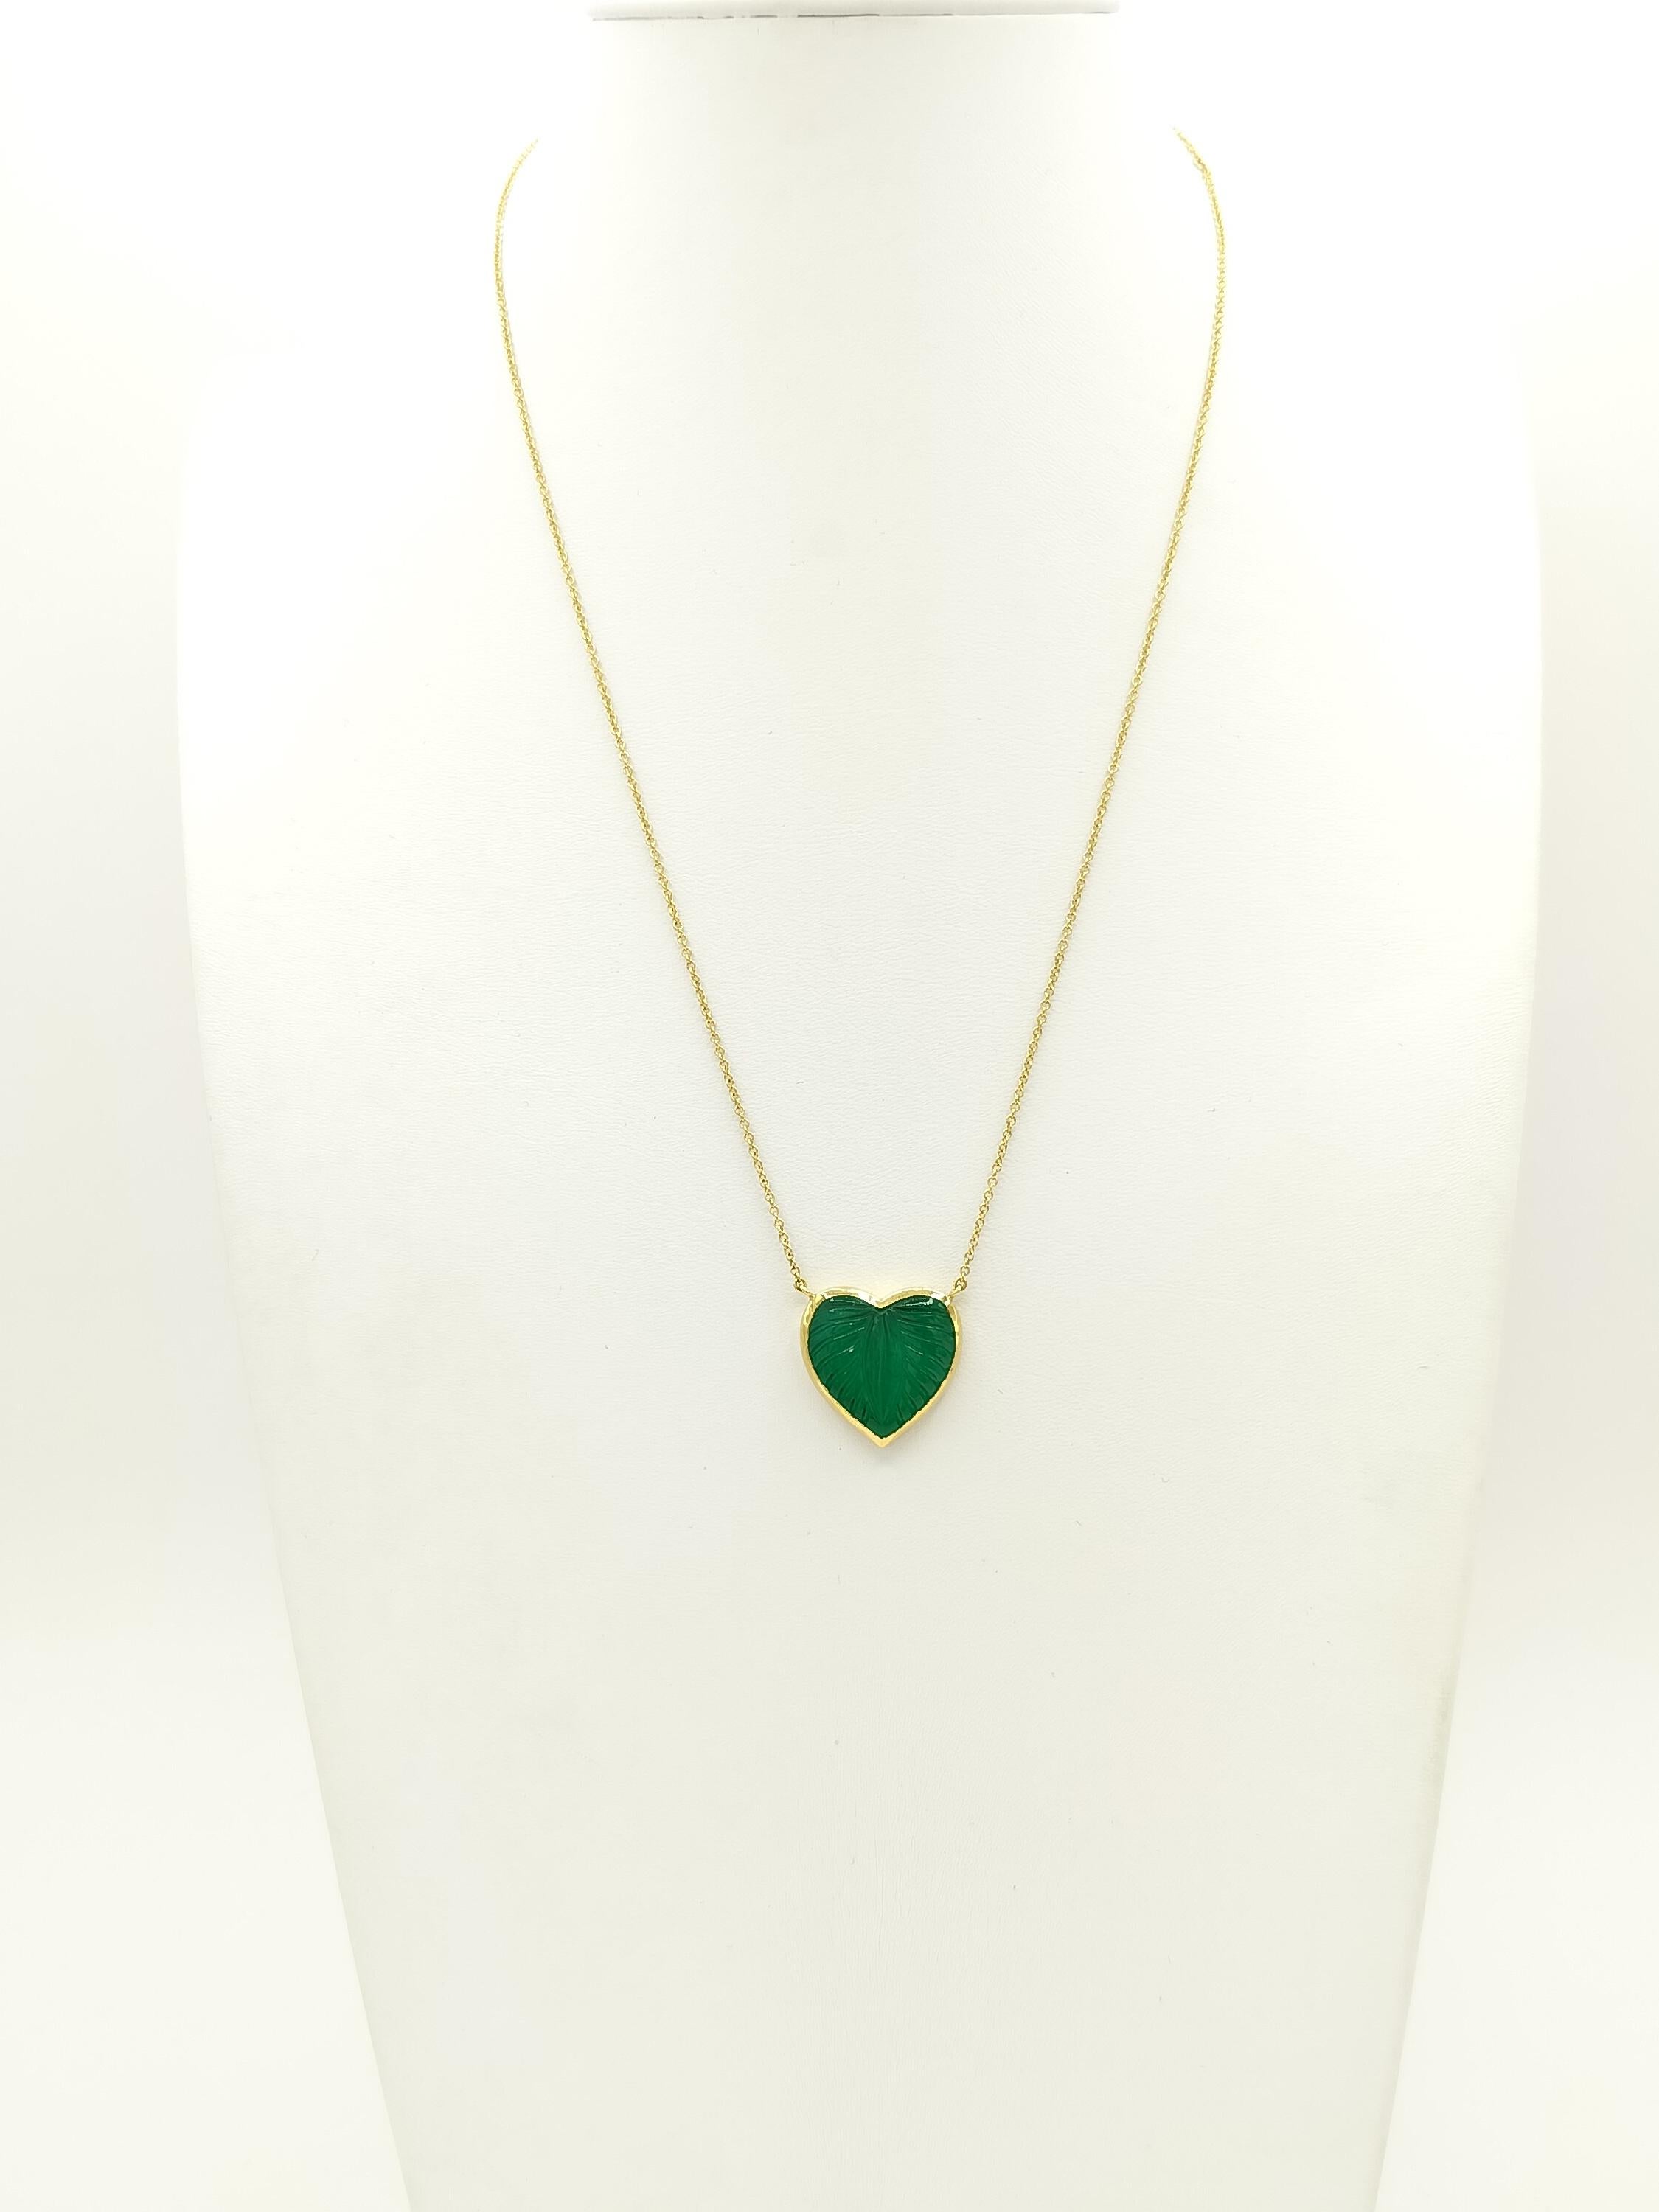 Women's or Men's Heart Shape Carved Emerald Pendant Necklace in 18K Yellow Gold For Sale